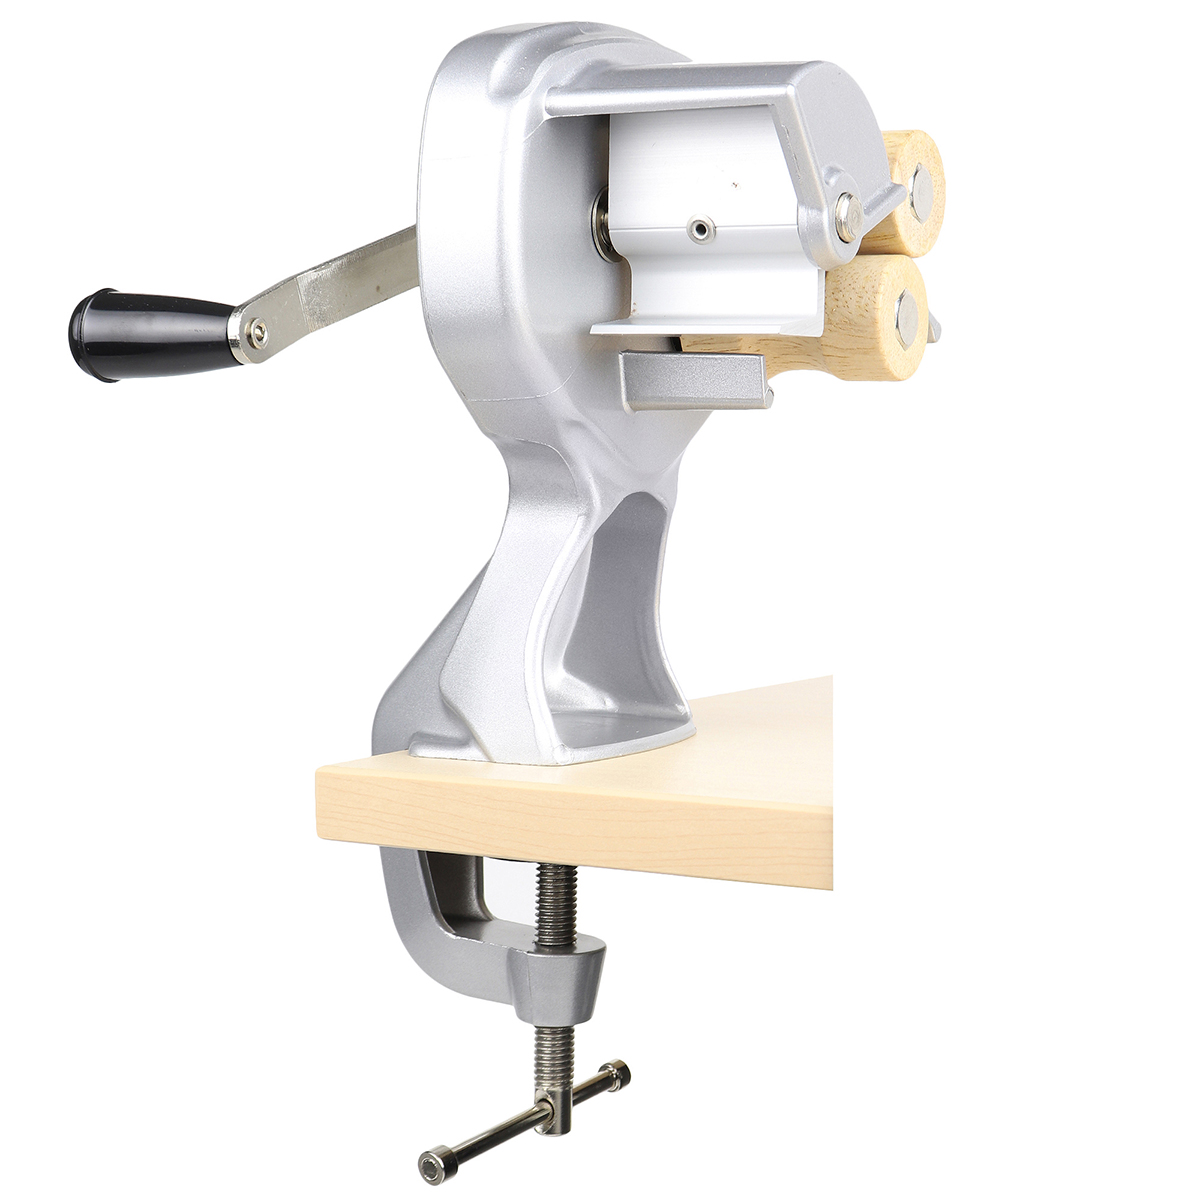 Cavatelli Maker with Nonstick Coating & Wooden Rollers image 2